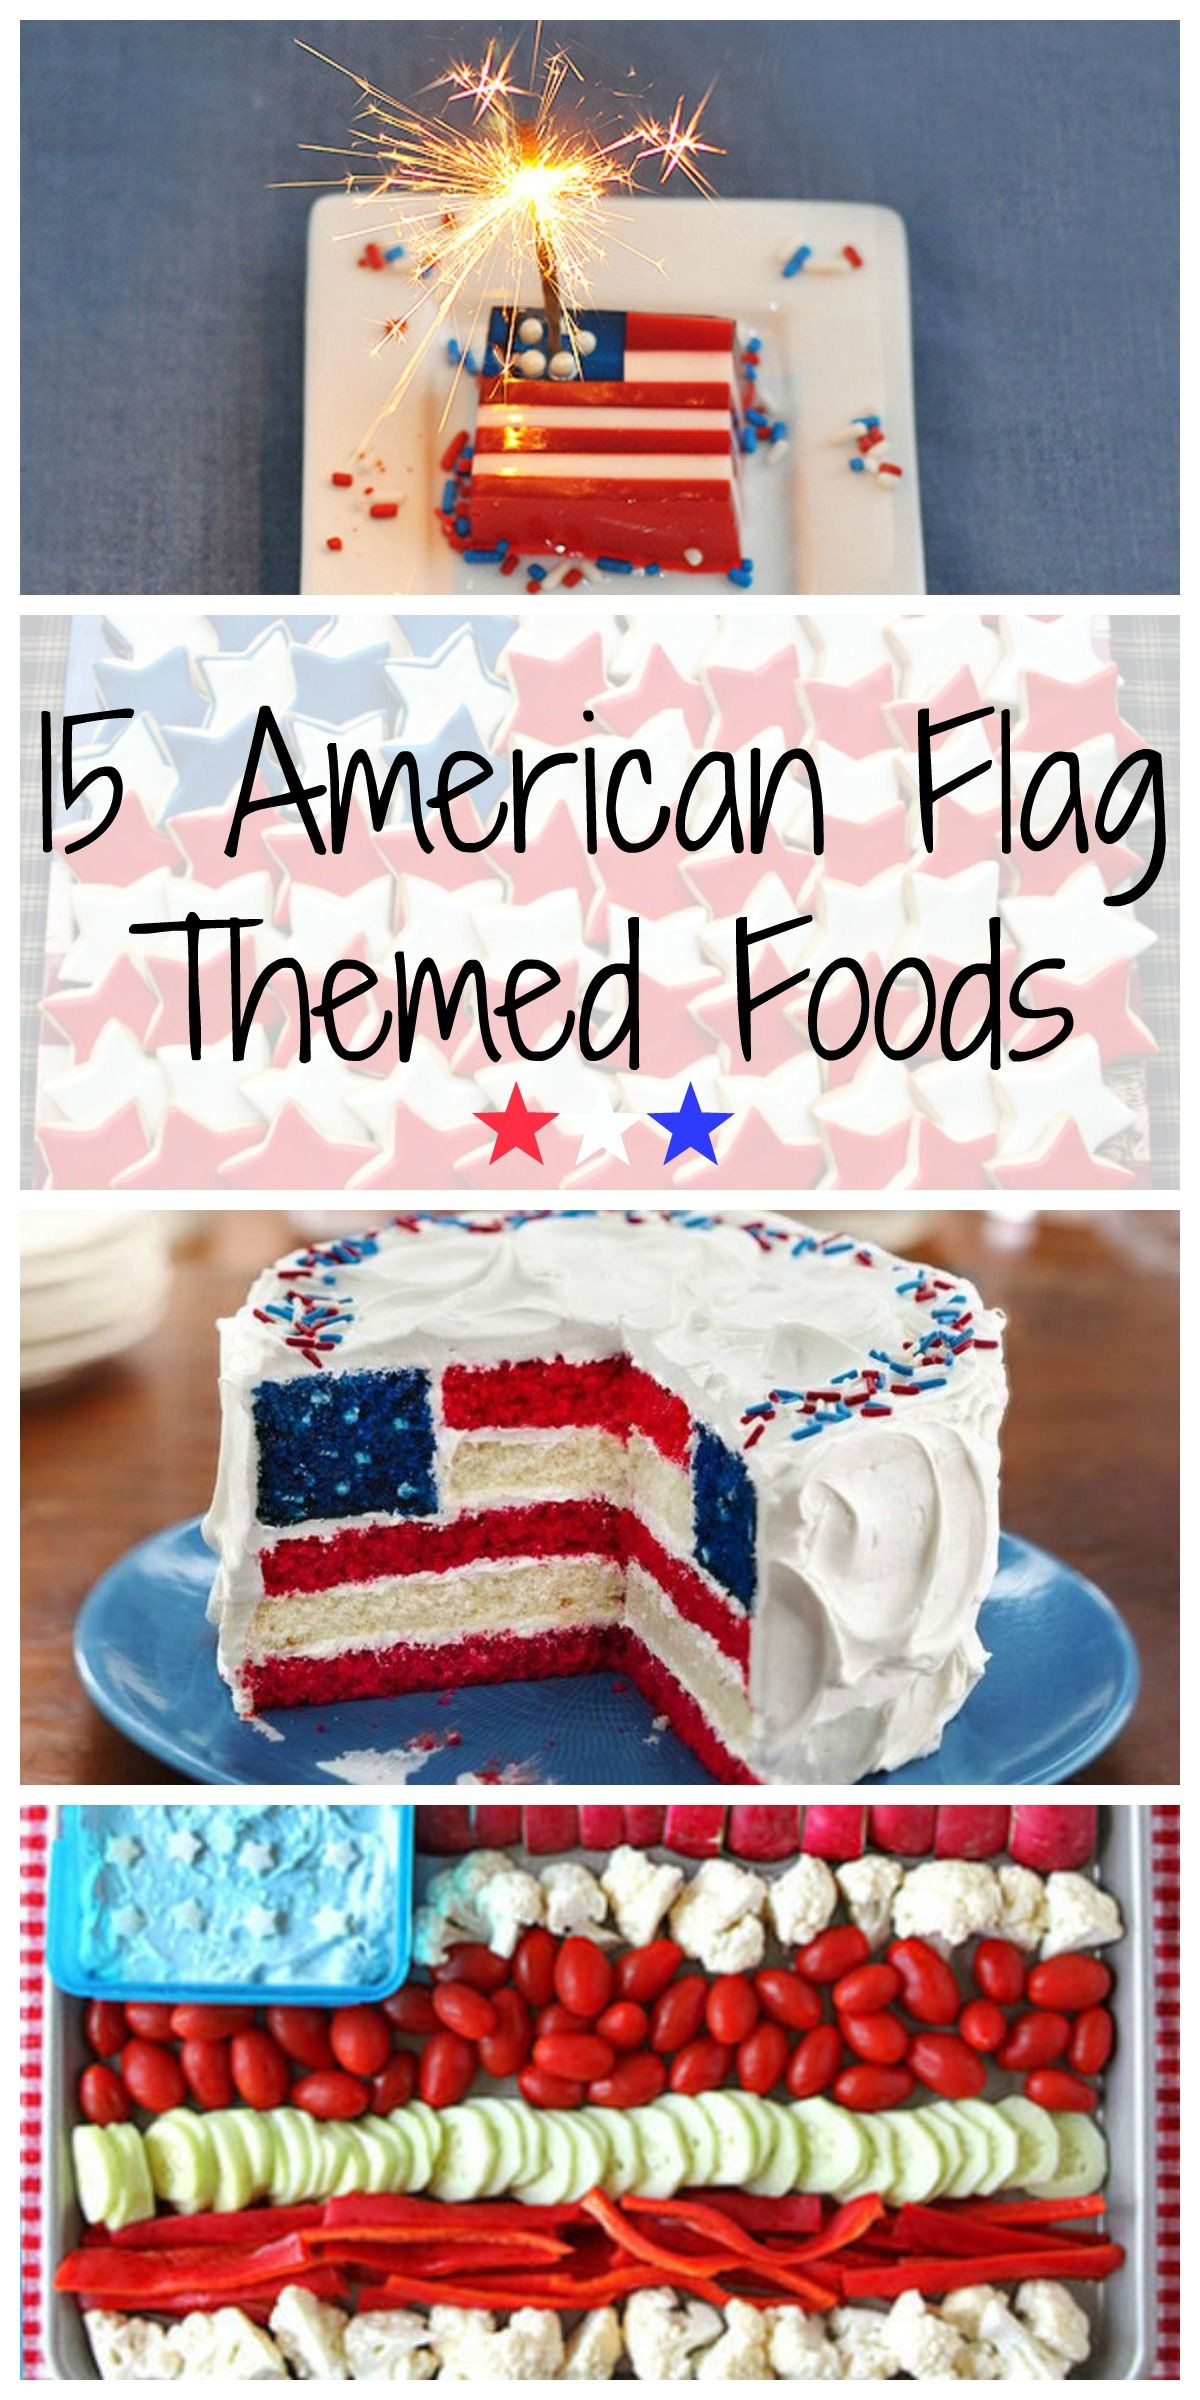 4th Of July Themed Food
 15 American Flag Themed Foods Your Fourth of July Party